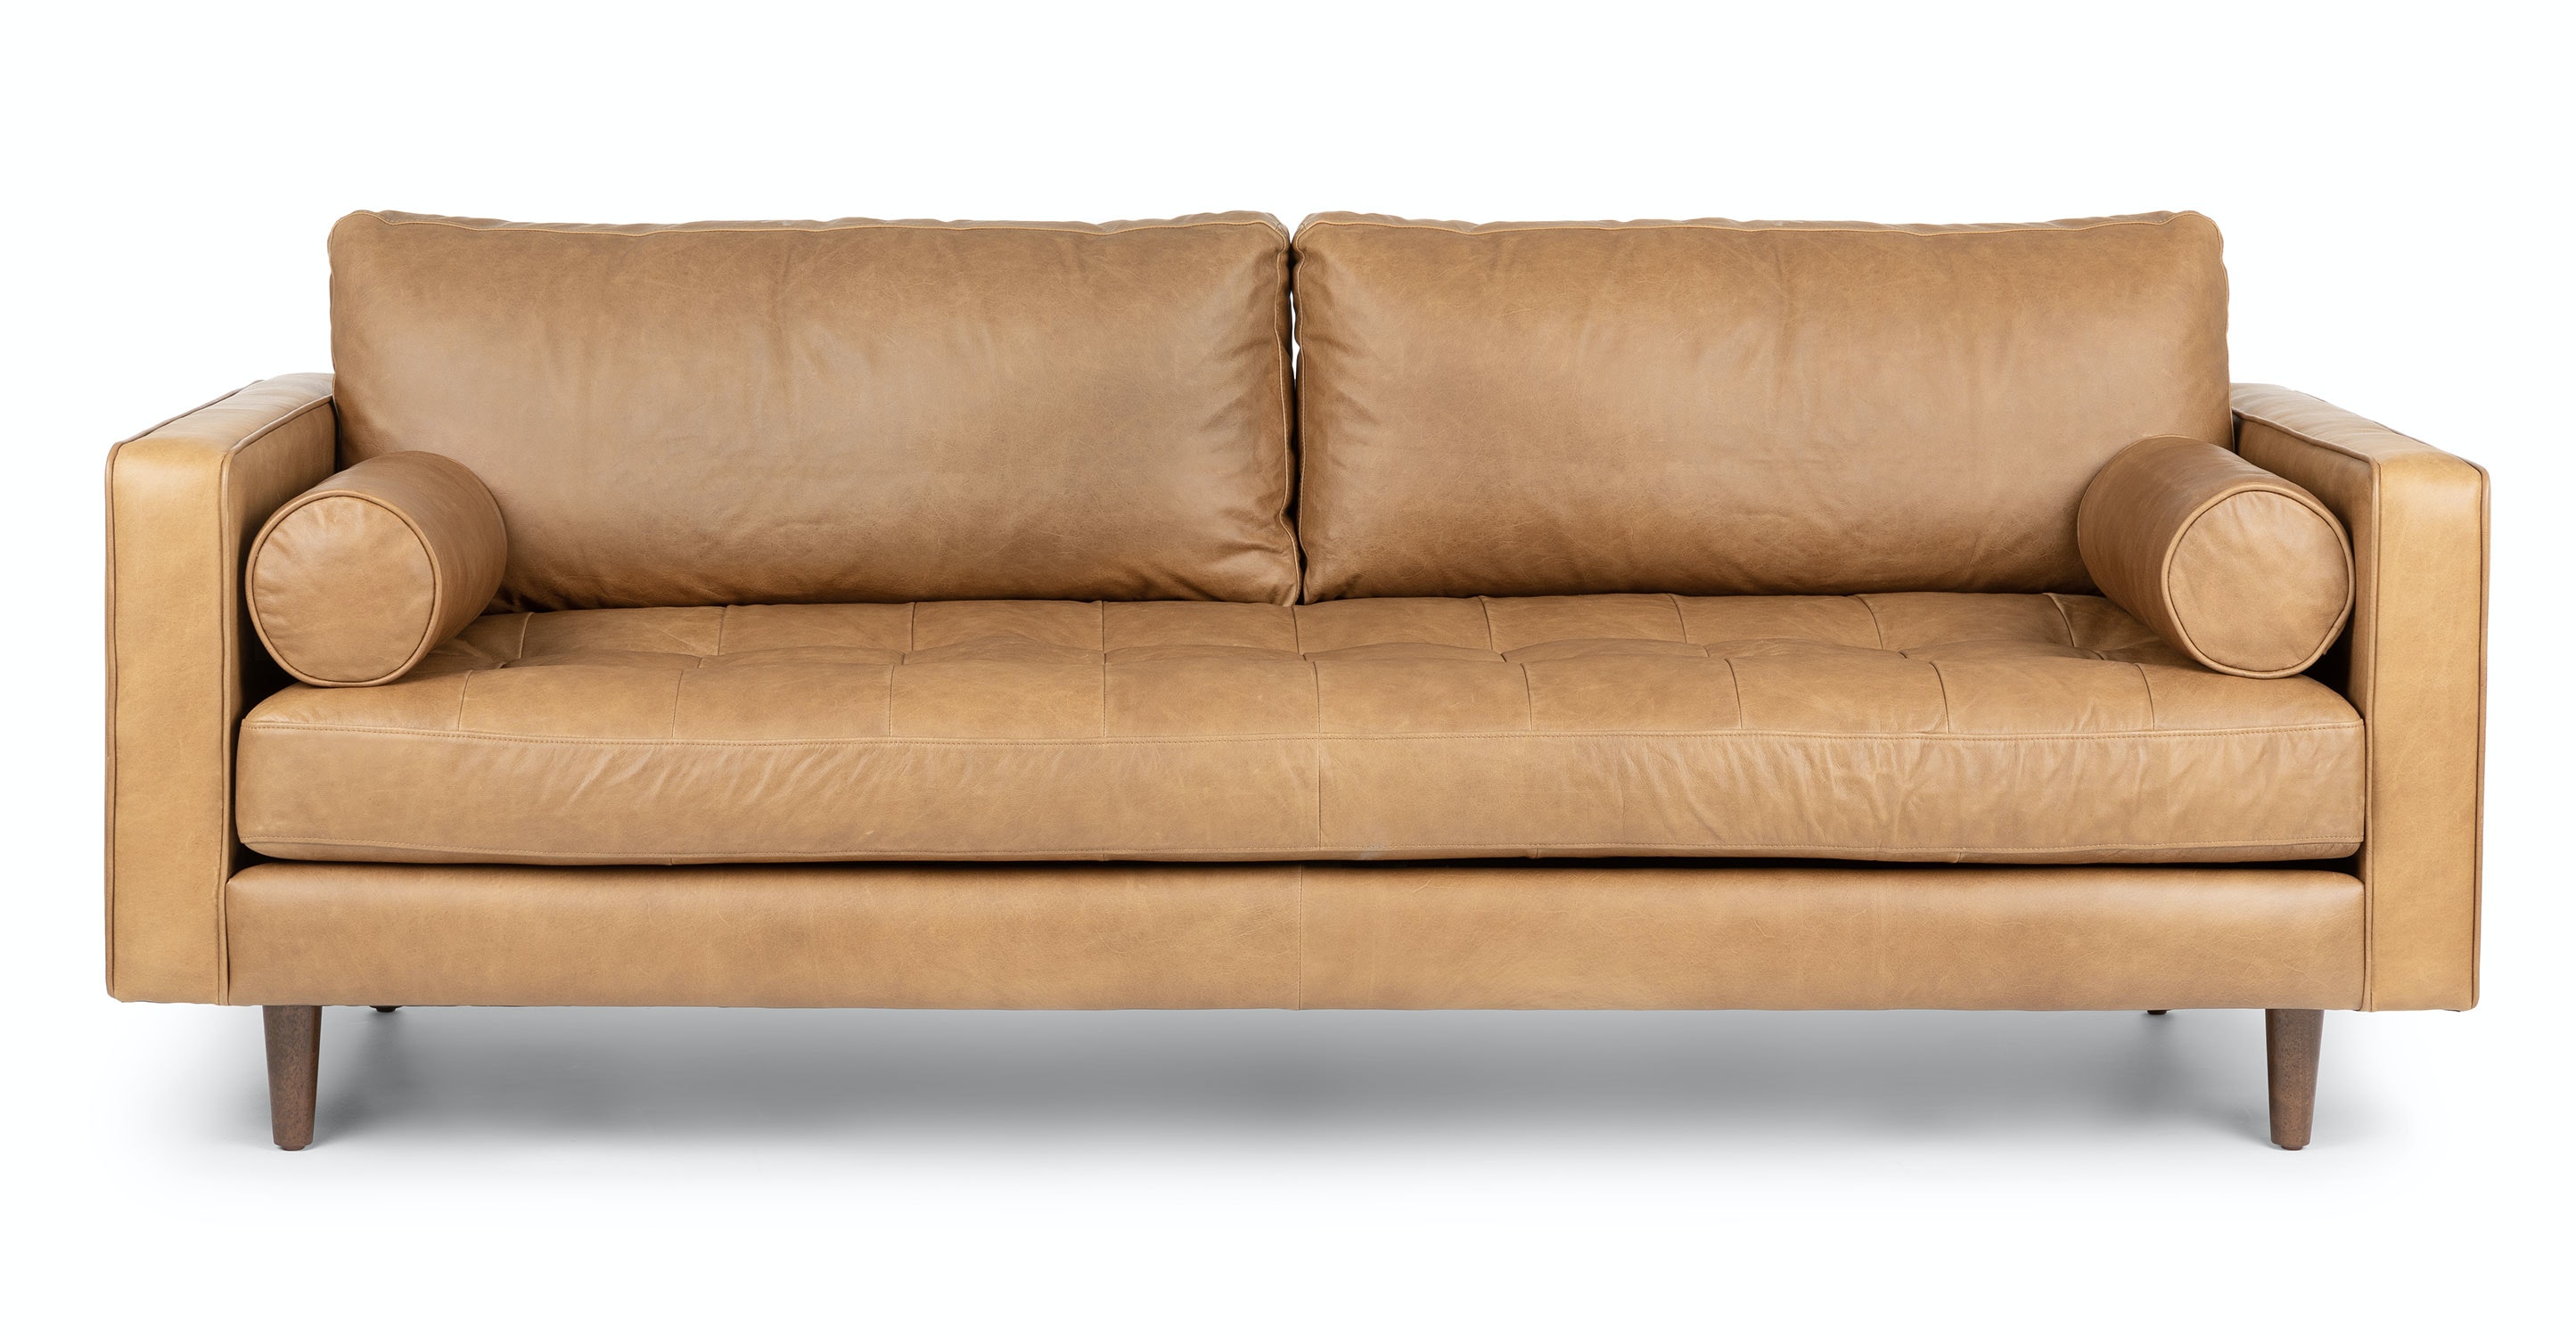 Couch Cover for Leather Couch Care and Maintenance - Archute